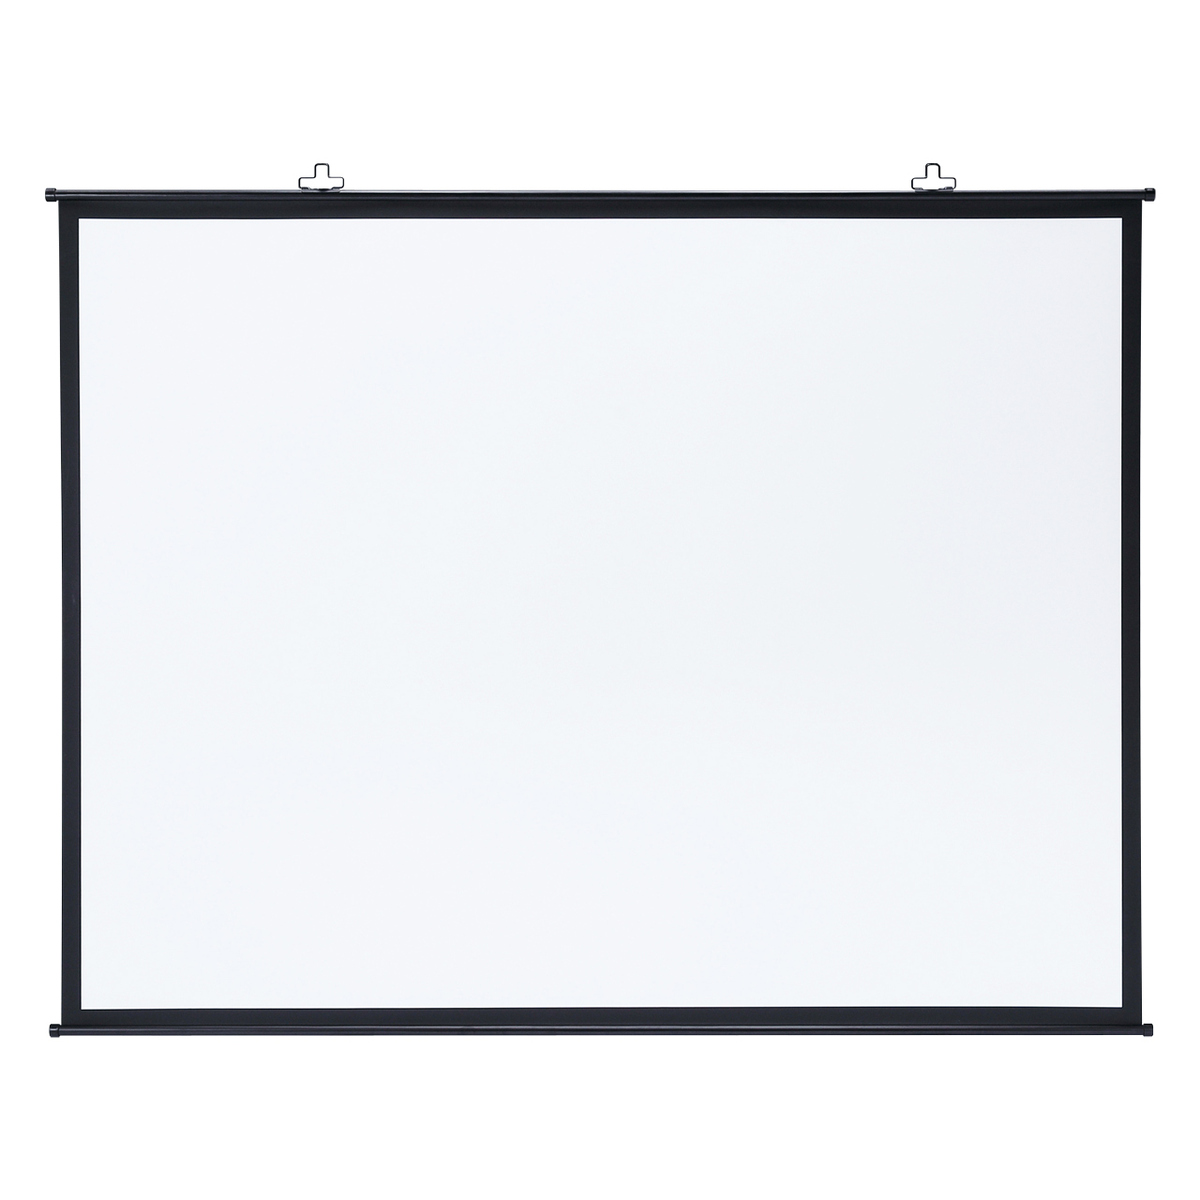 Projector Screen (Wall Mounted Style), PRS-KB Series